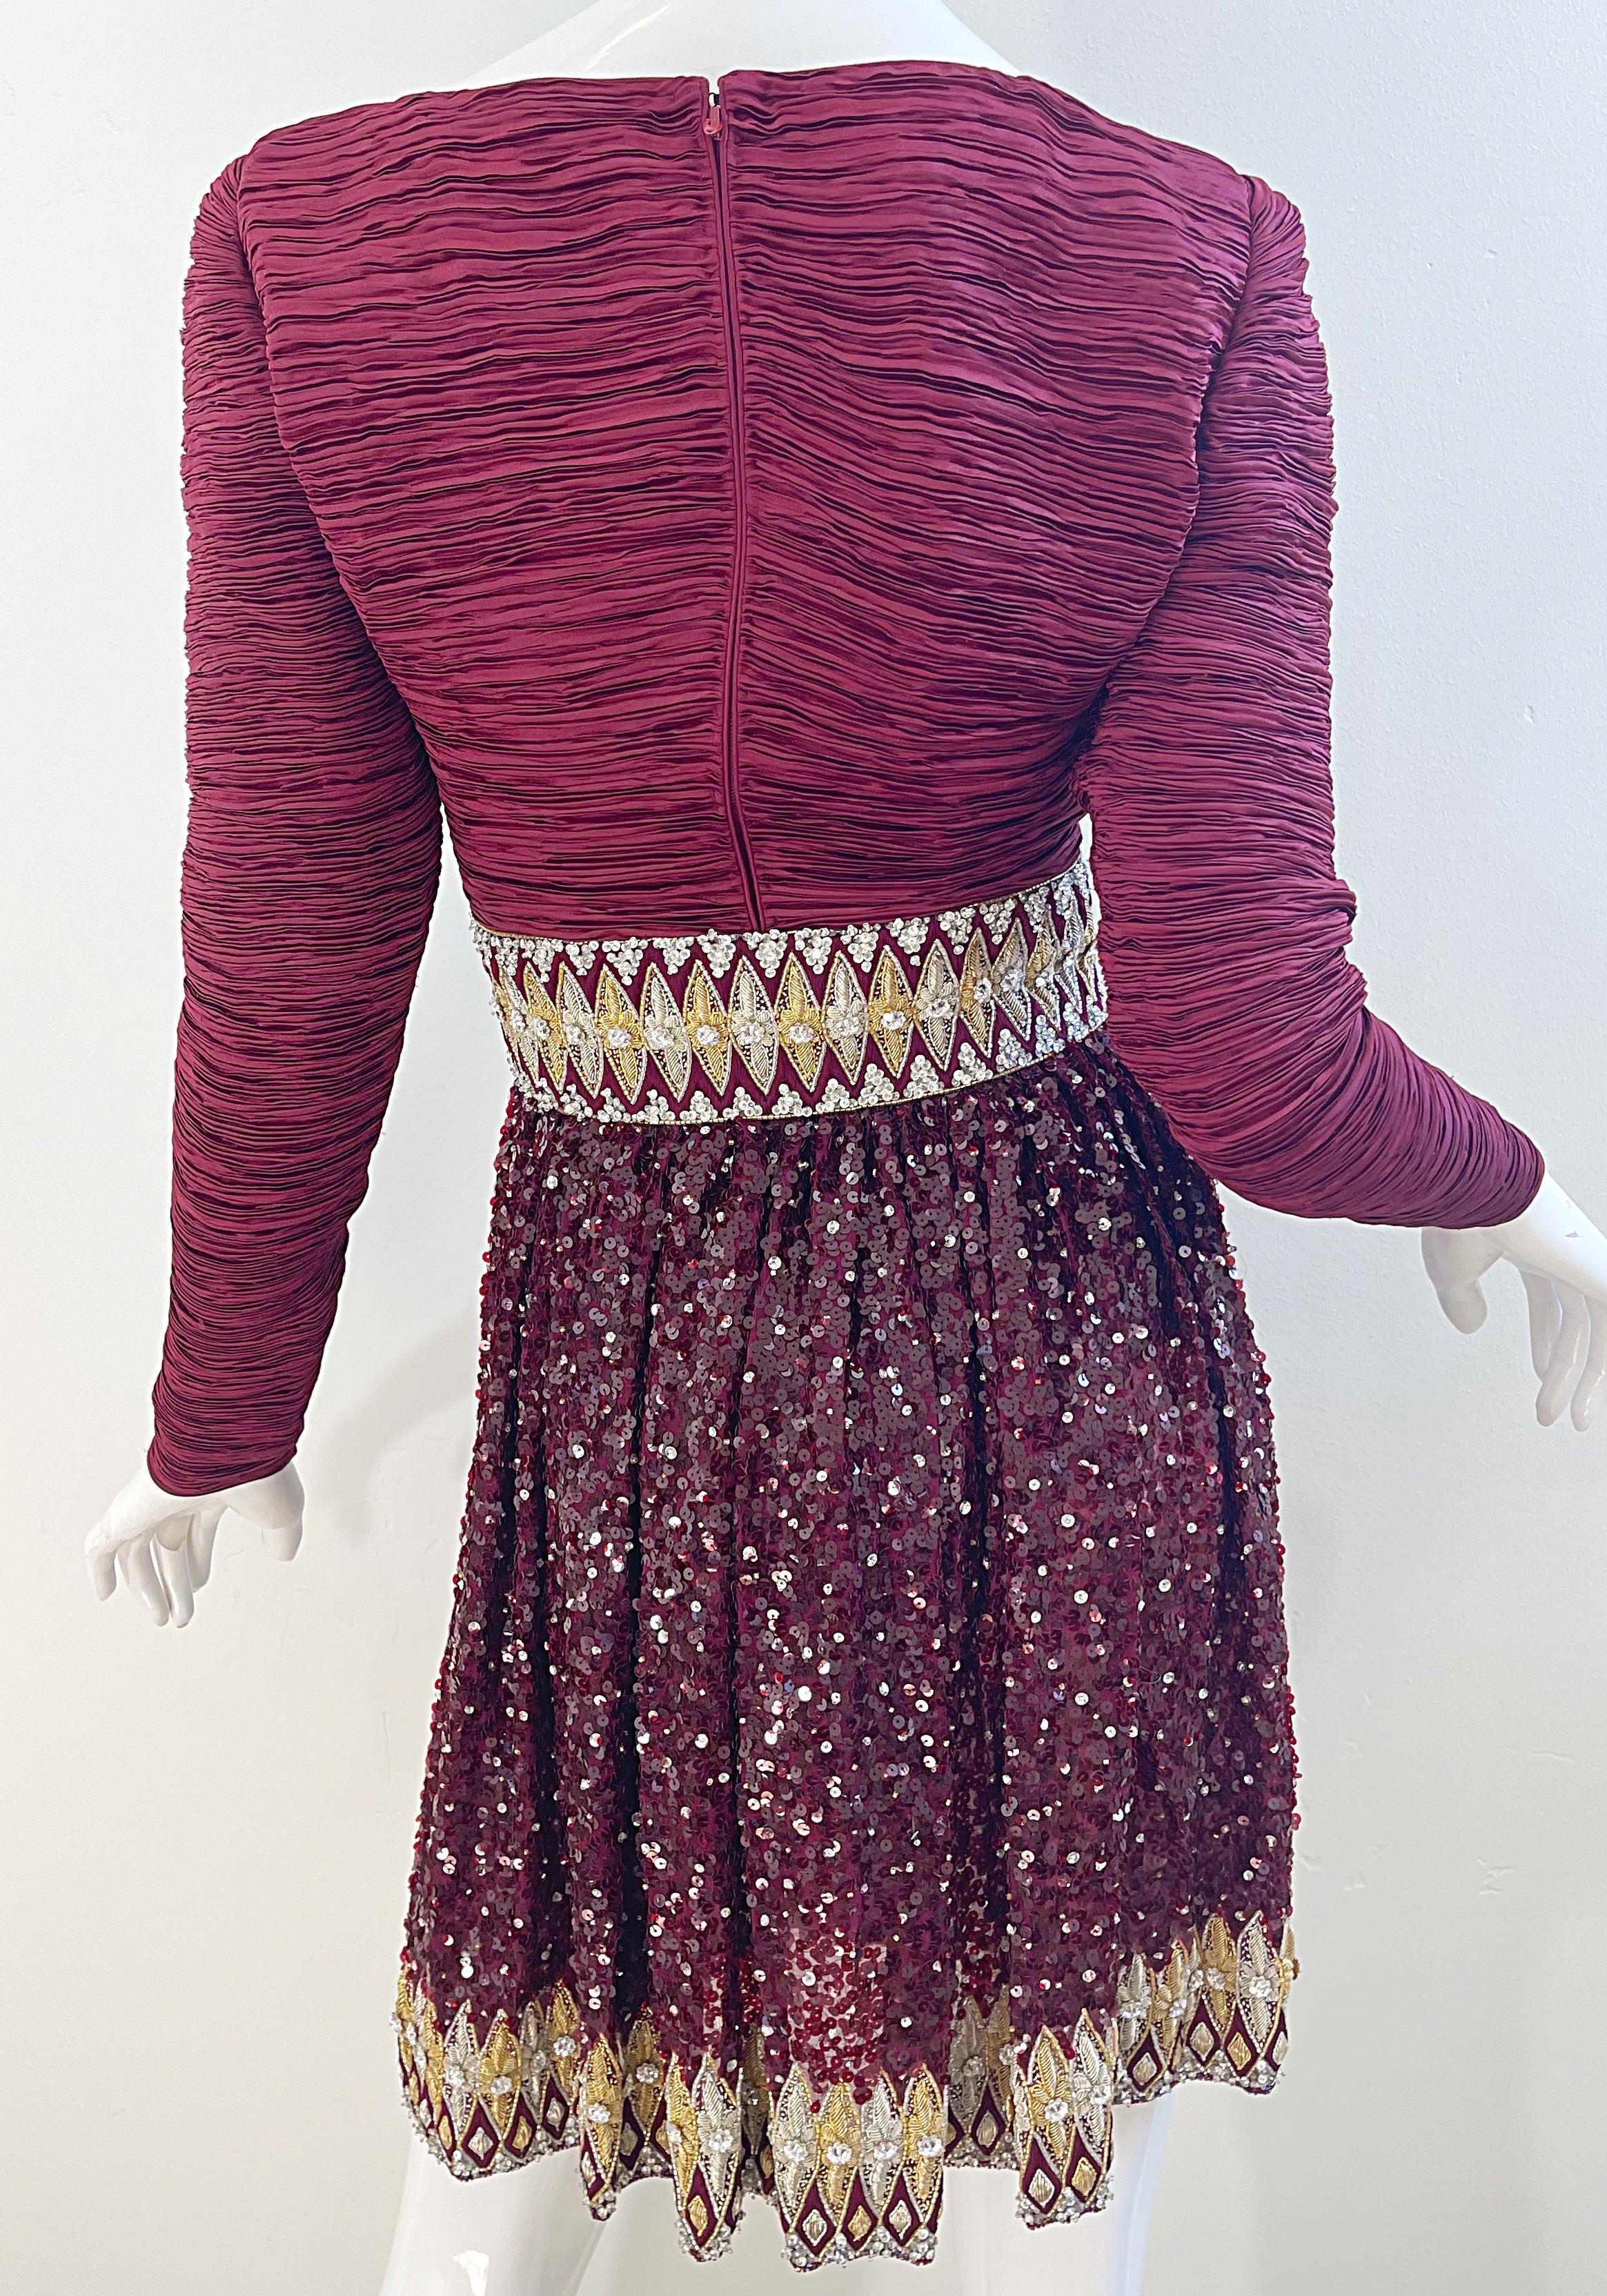 1990s Mary McFadden Couture Size 2 / 4 Burgundy Sequin Pleated Vintage 90s Dress For Sale 8